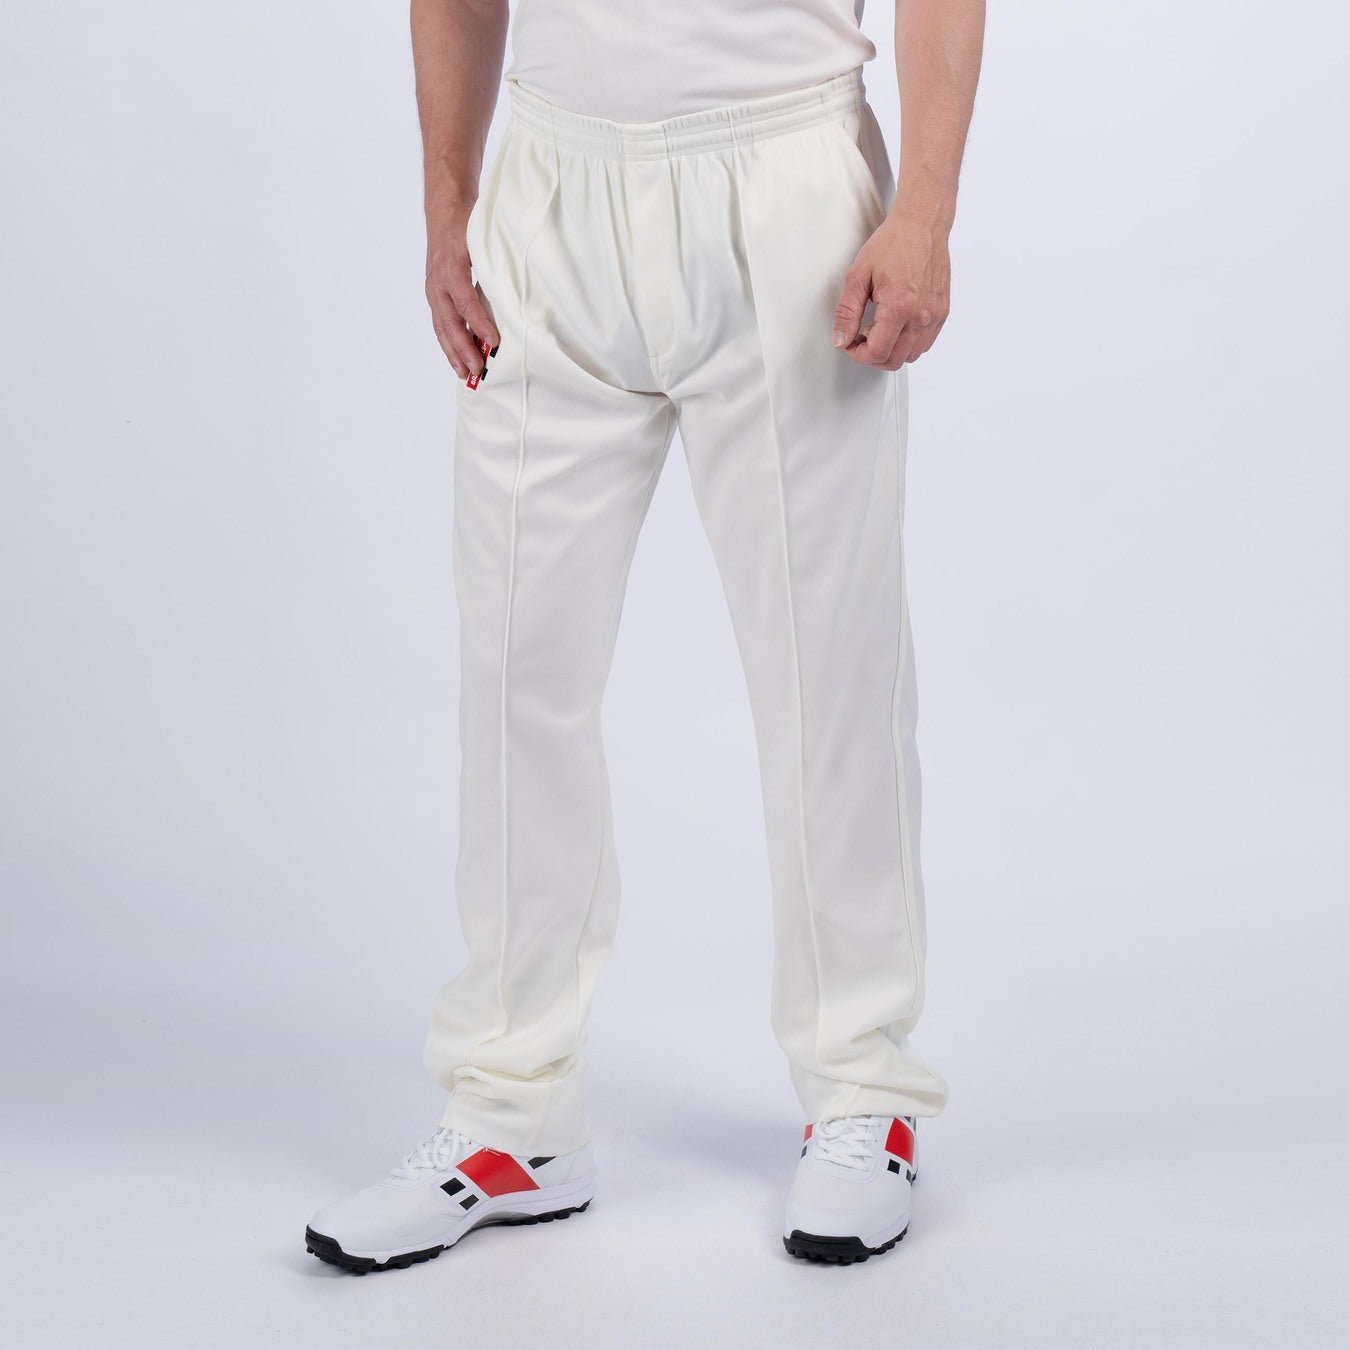 Gray Nicolls GN10 Pro Performance Off White Cricket Trouser Size Small   Amazonin Clothing  Accessories